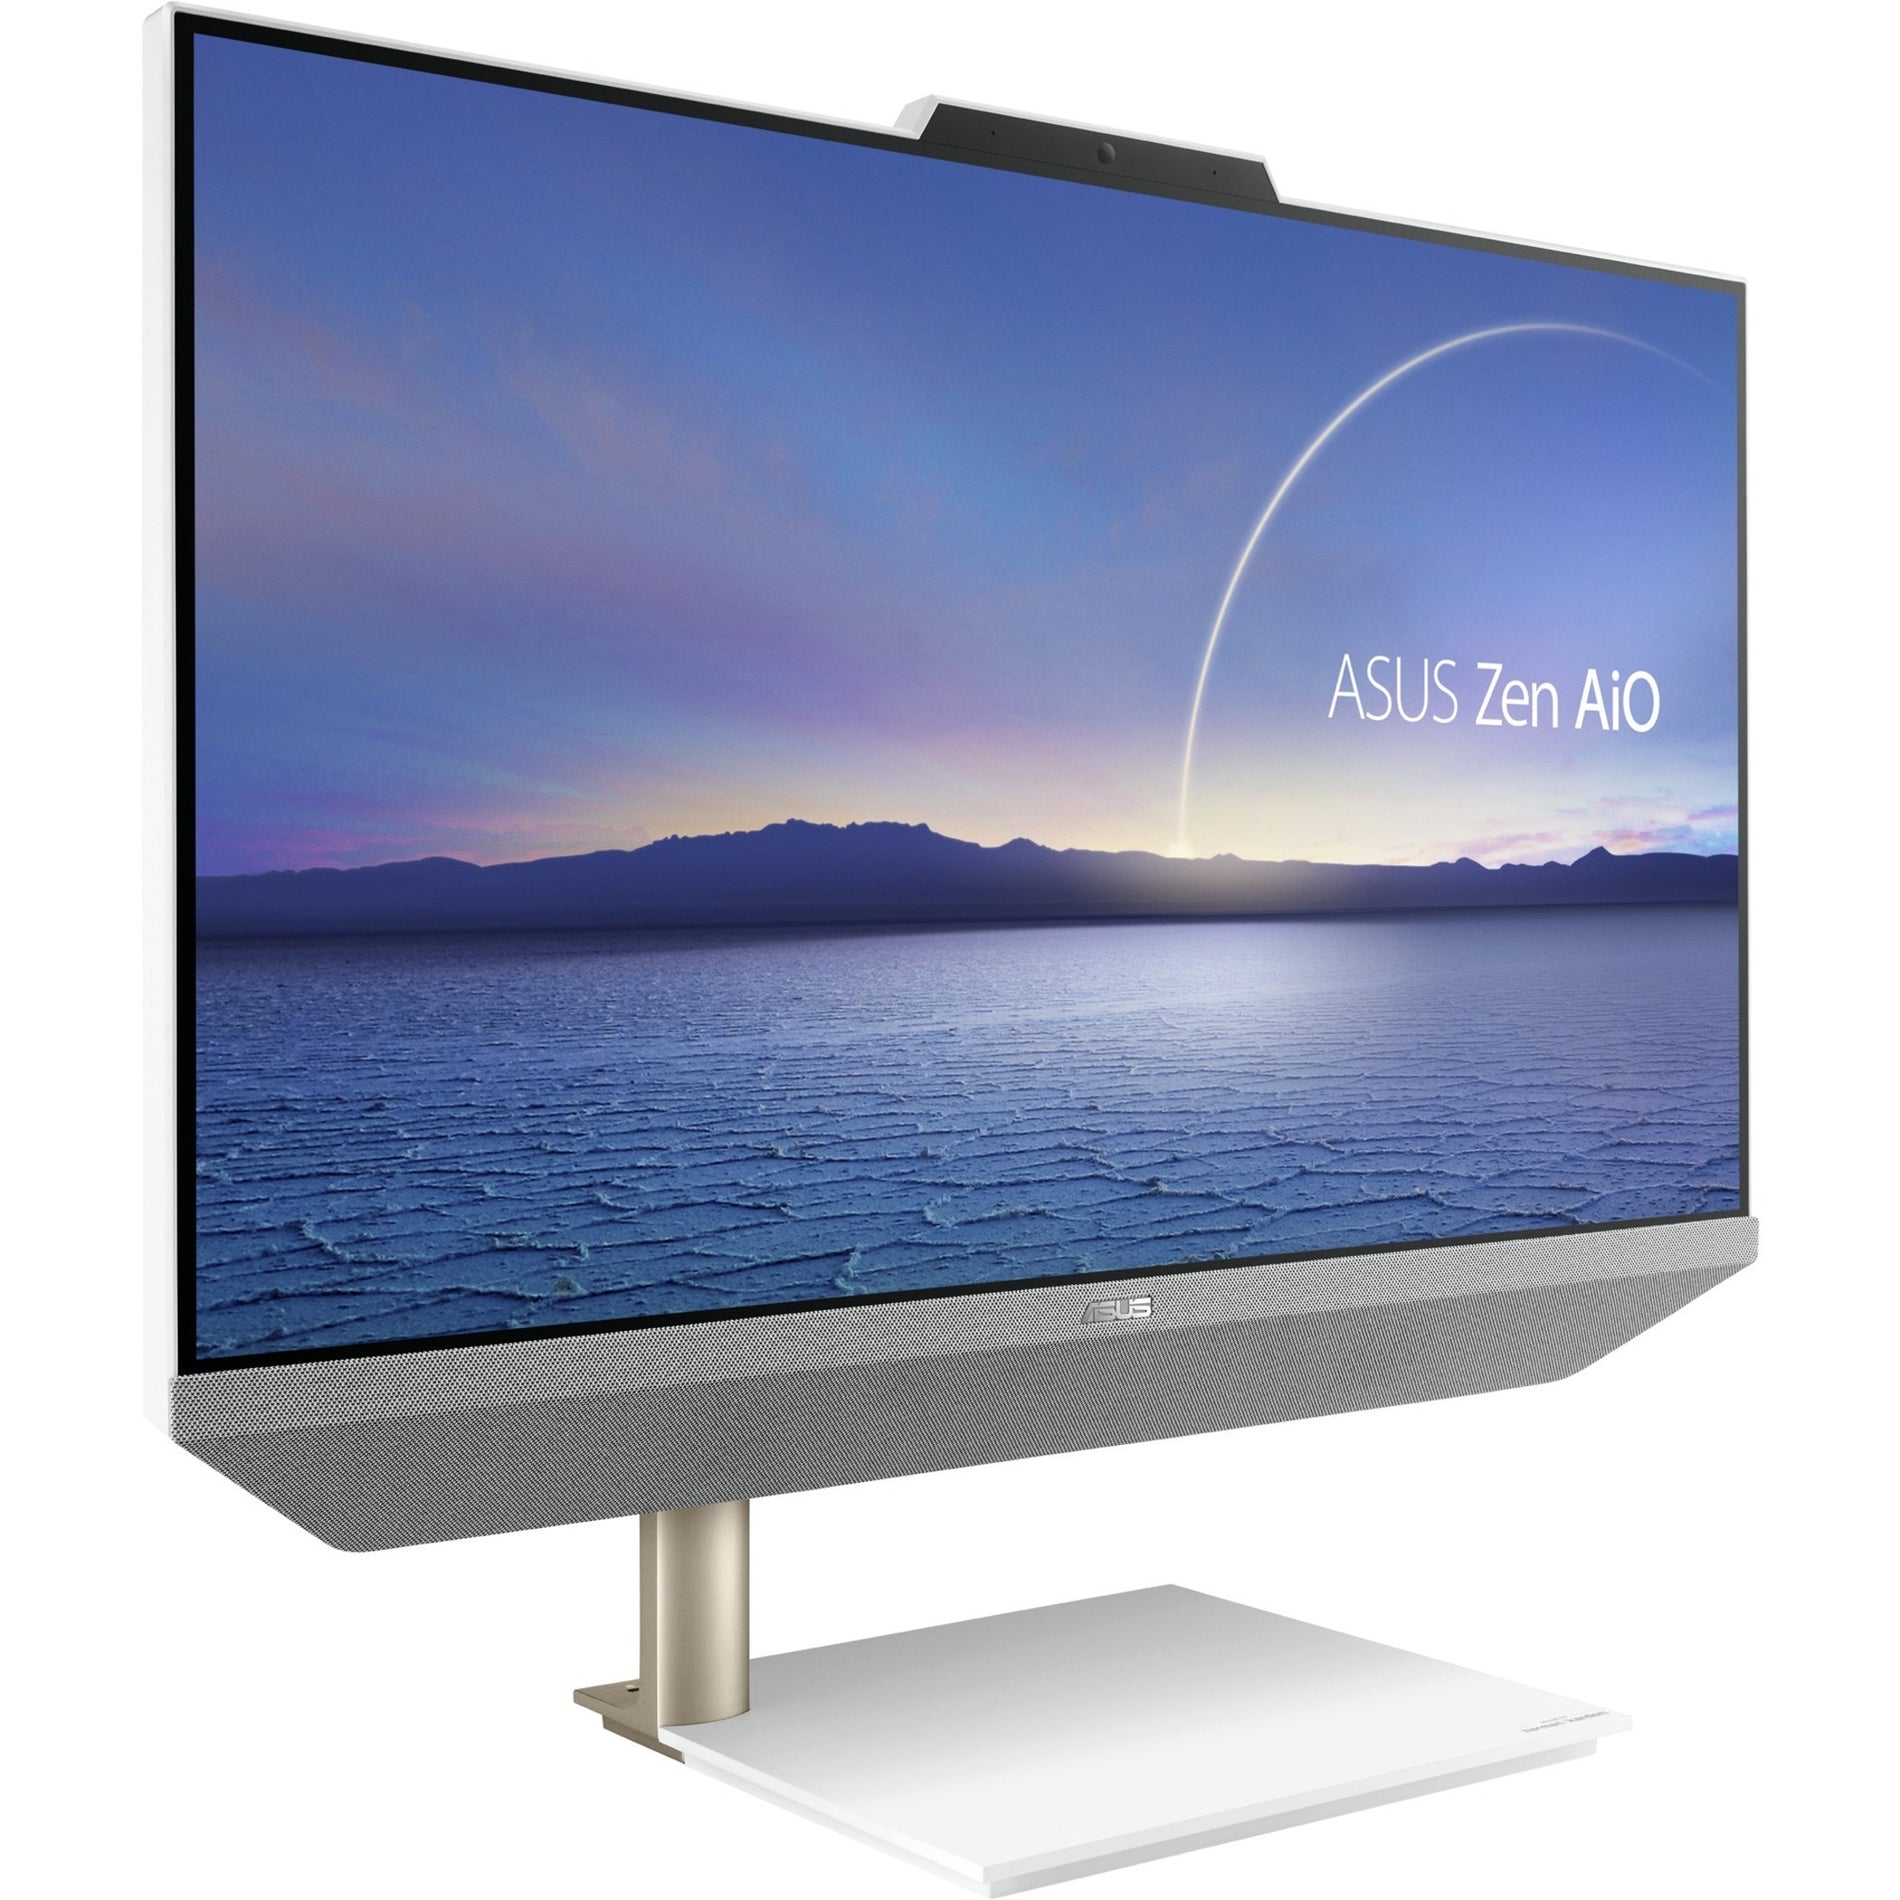 Asus M5401WUA-DS503T Zen AiO All-in-One Computer, Ryzen 5, 8GB RAM, 512GB SSD, 23.8" Touchscreen Display, White